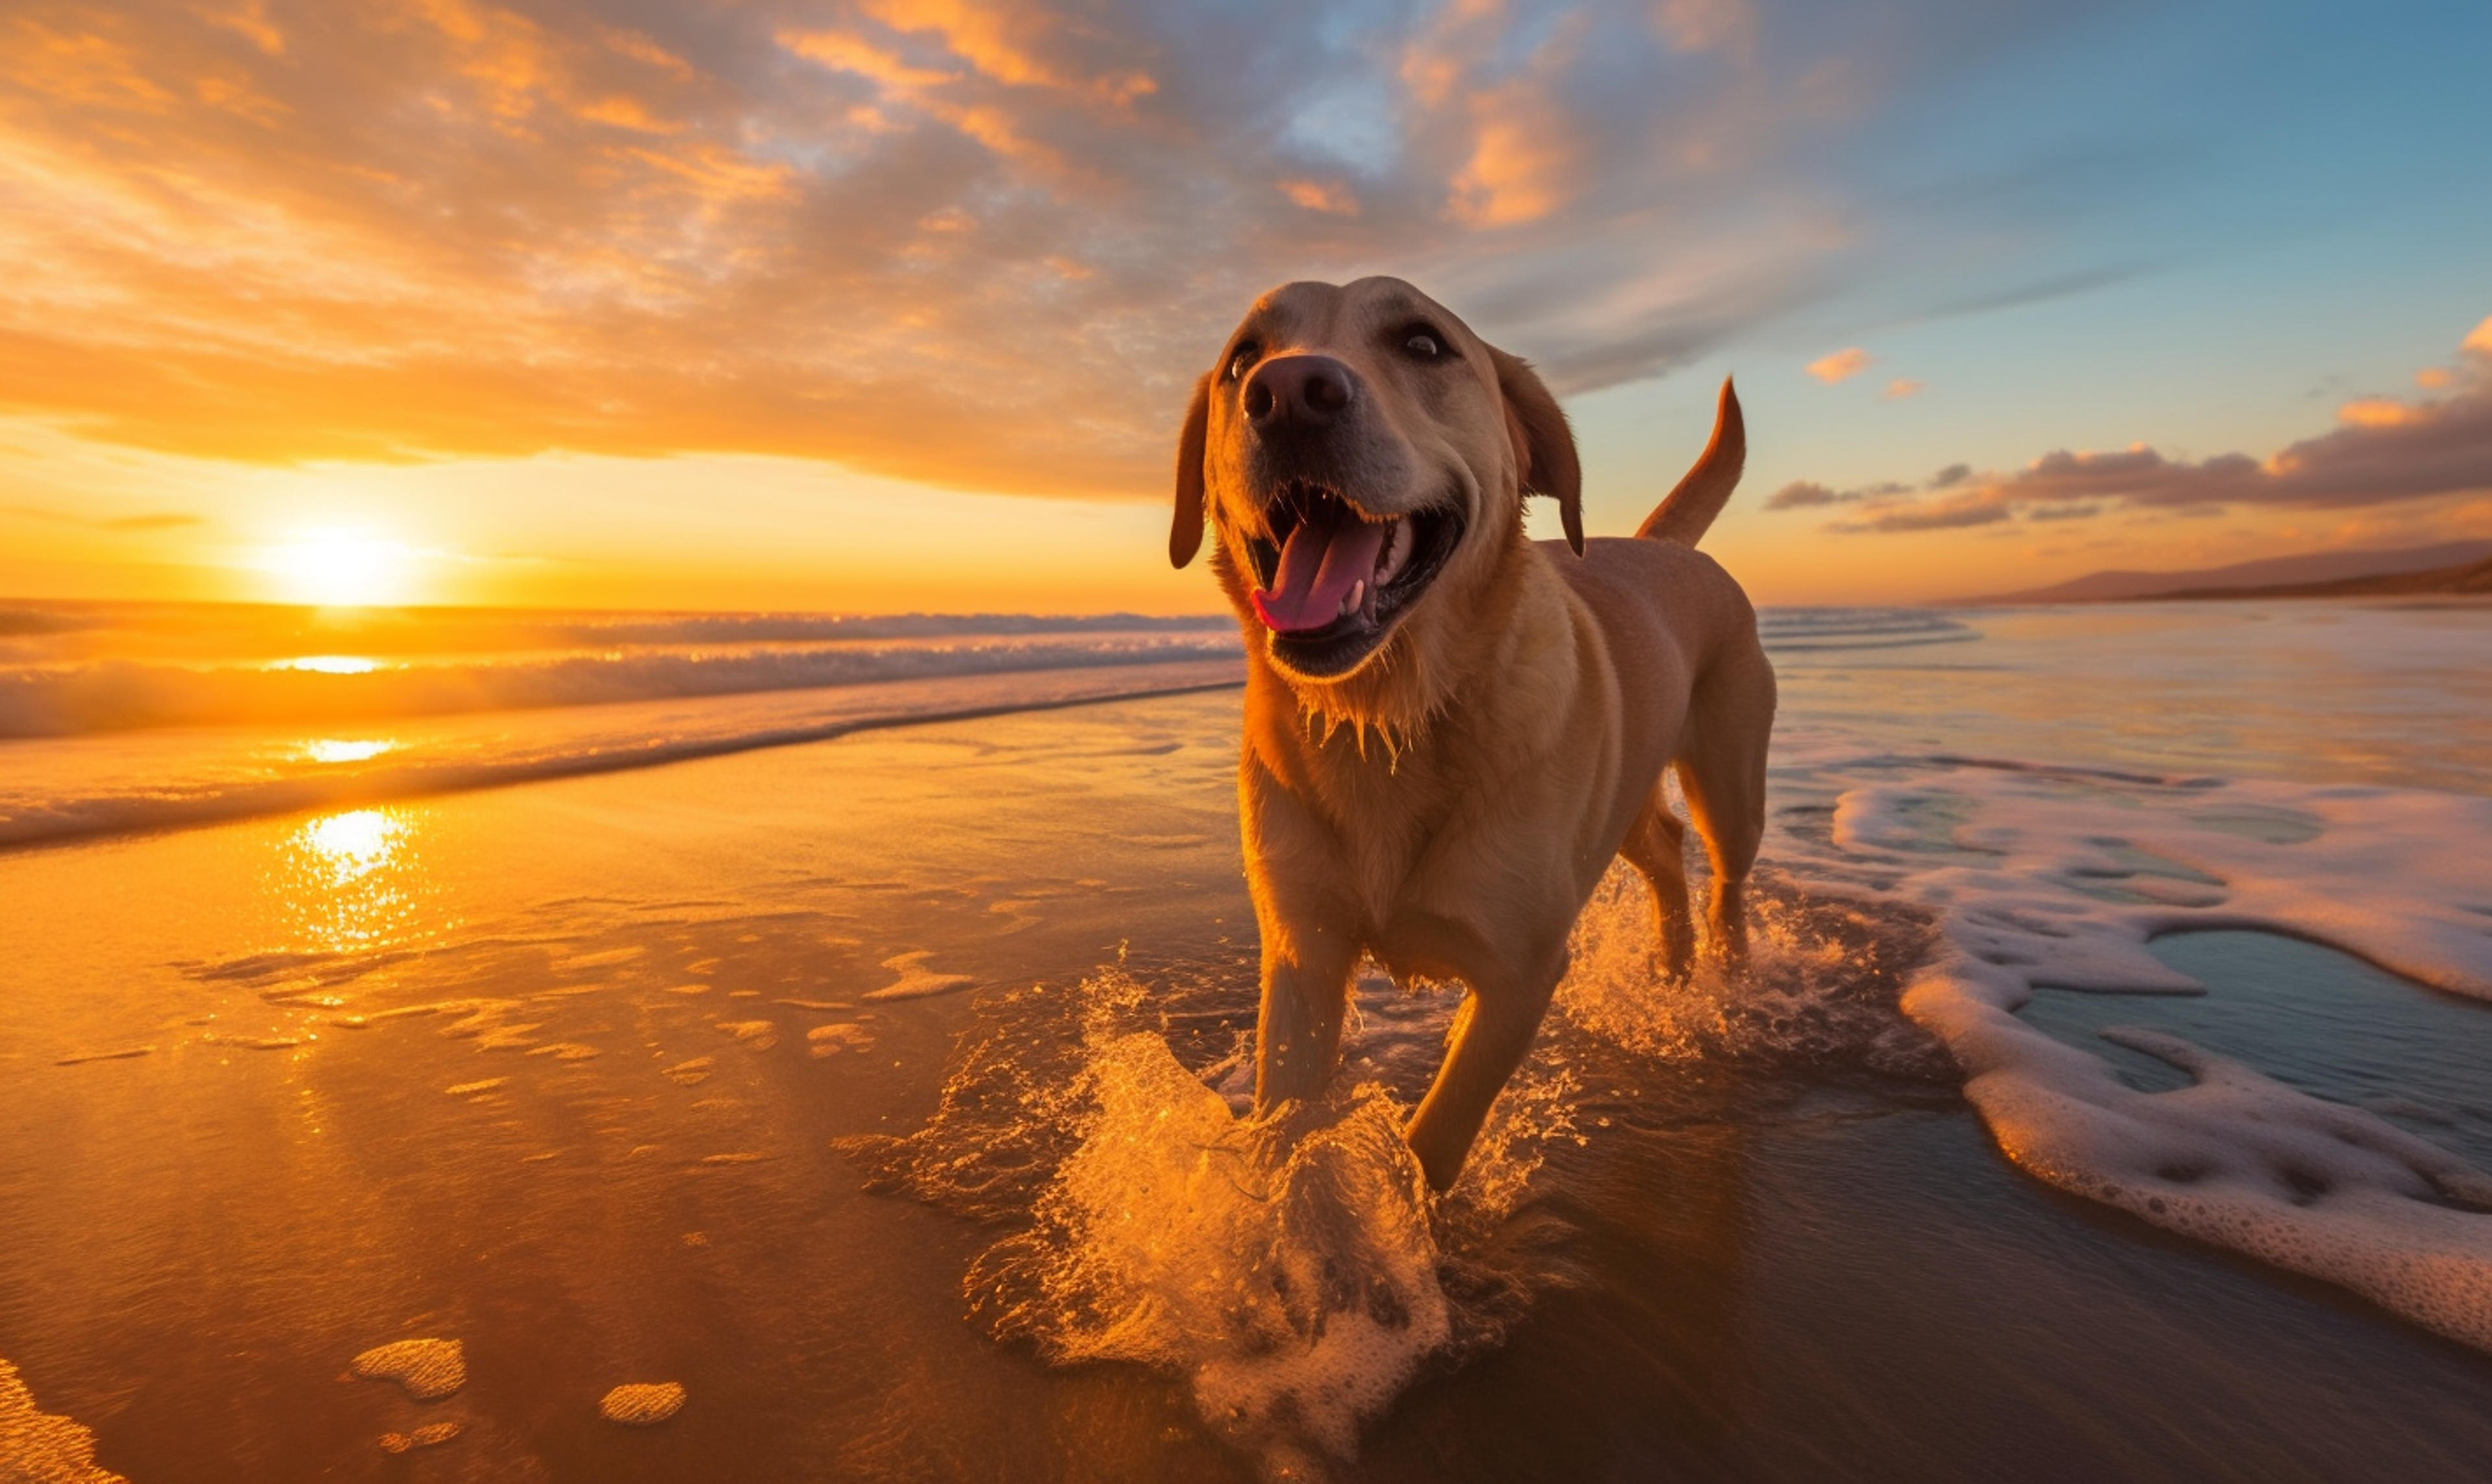 Picture a serene beach at sunset, where a playful Labrador Retriever bounds through the crashing waves. Describe the excitement and freedom in its movements as it enjoys the salty breeze and sandy shore